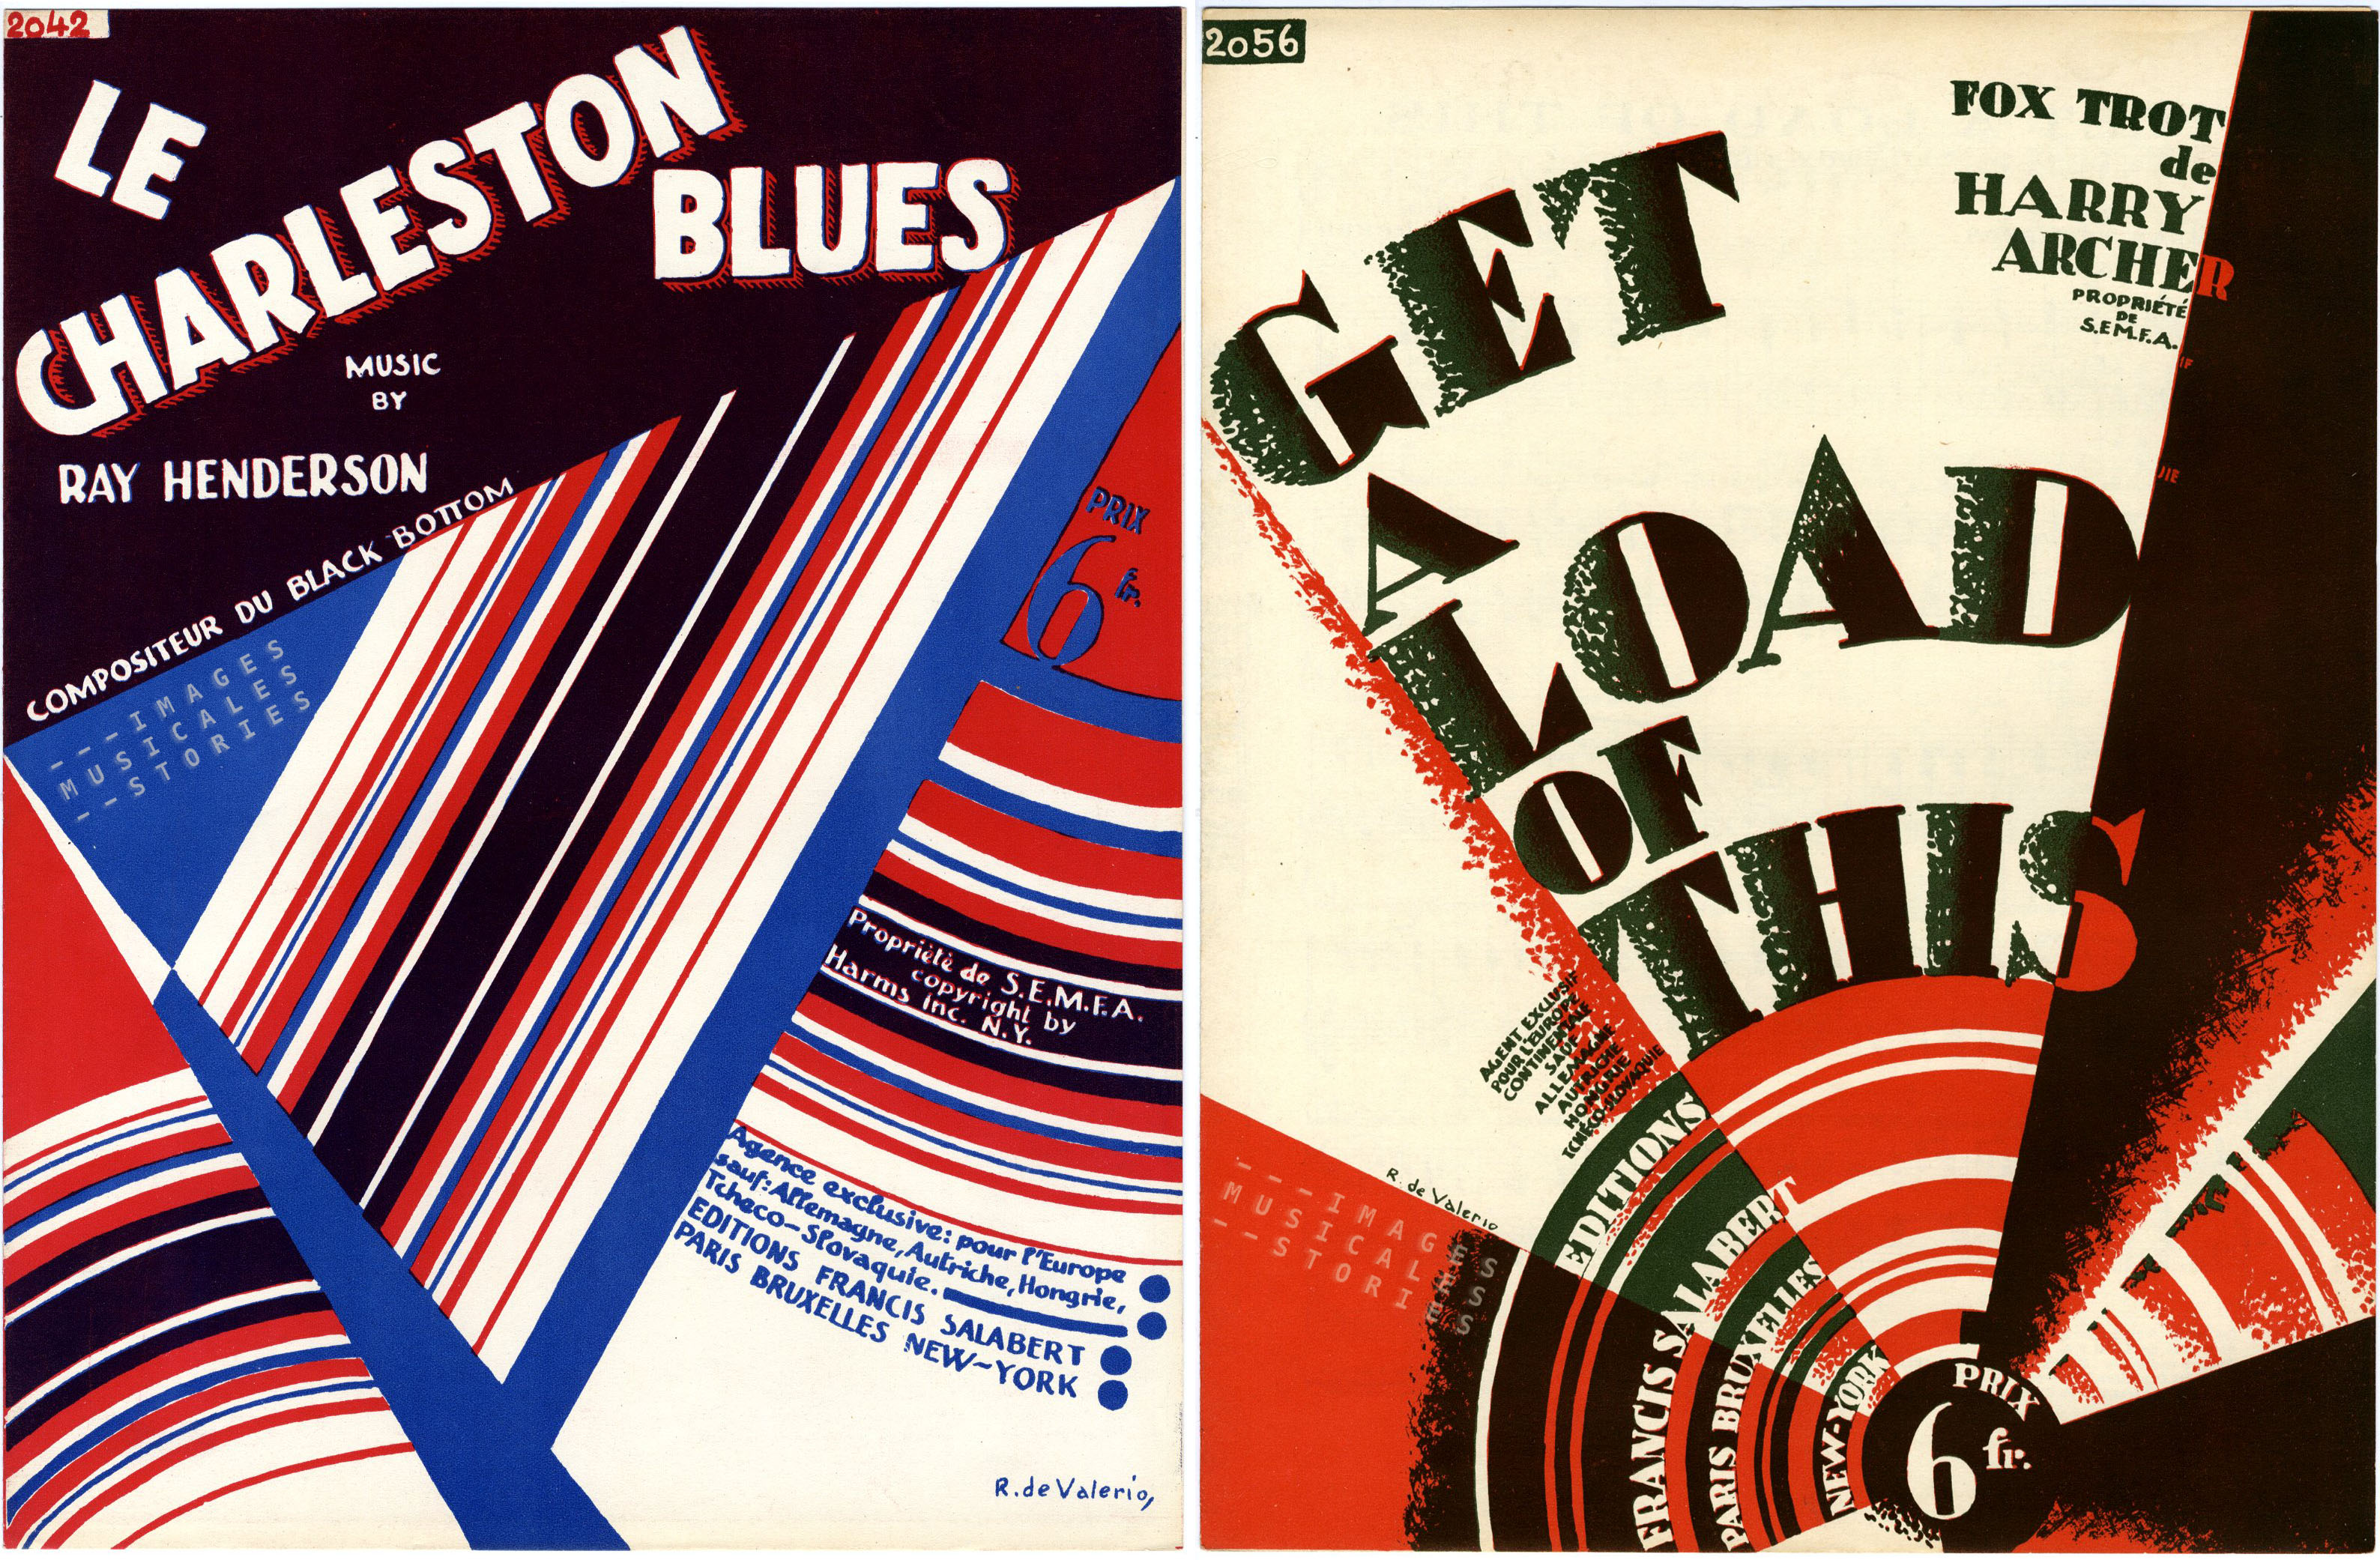 Abstract sheet music covers illustrated by Roger de Valerio.